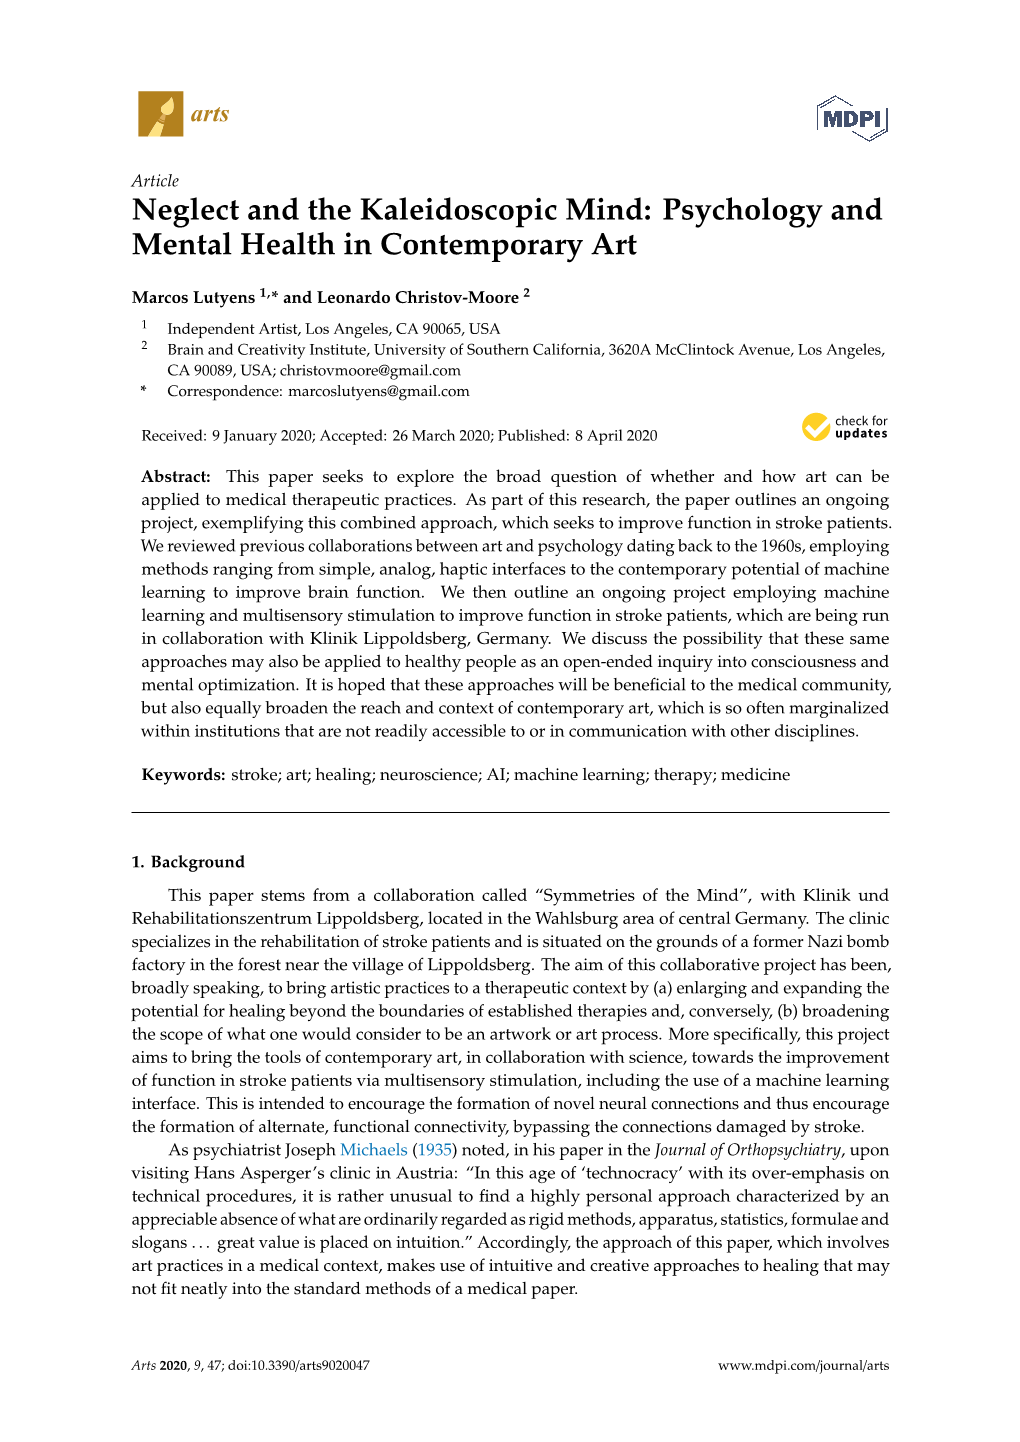 Psychology and Mental Health in Contemporary Art